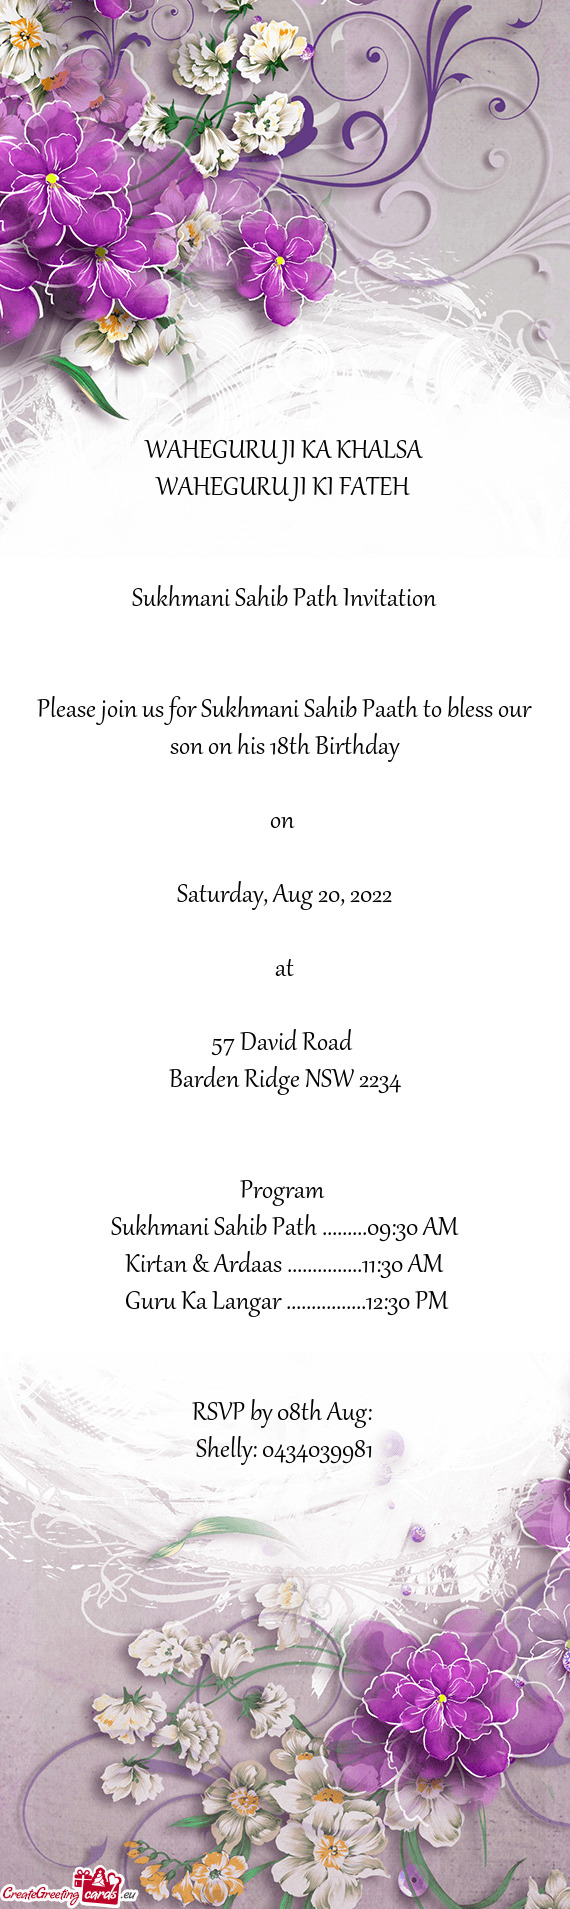 Please join us for Sukhmani Sahib Paath to bless our son on his 18th Birthday